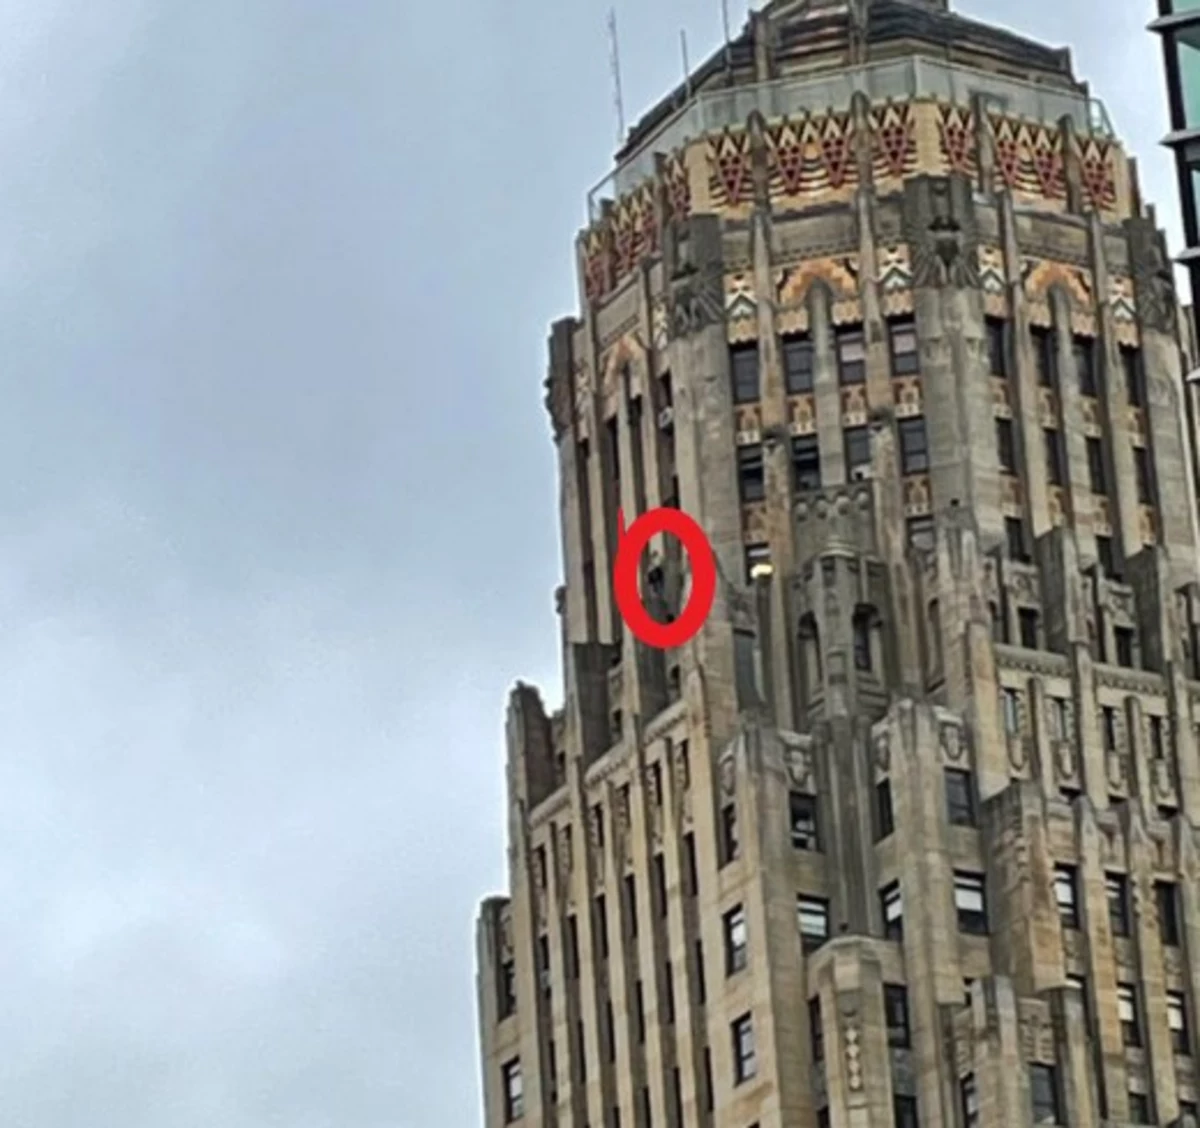 Omkostningsprocent Canada oase Jumper On Ledge At Buffalo's City Hall in Scary Situation